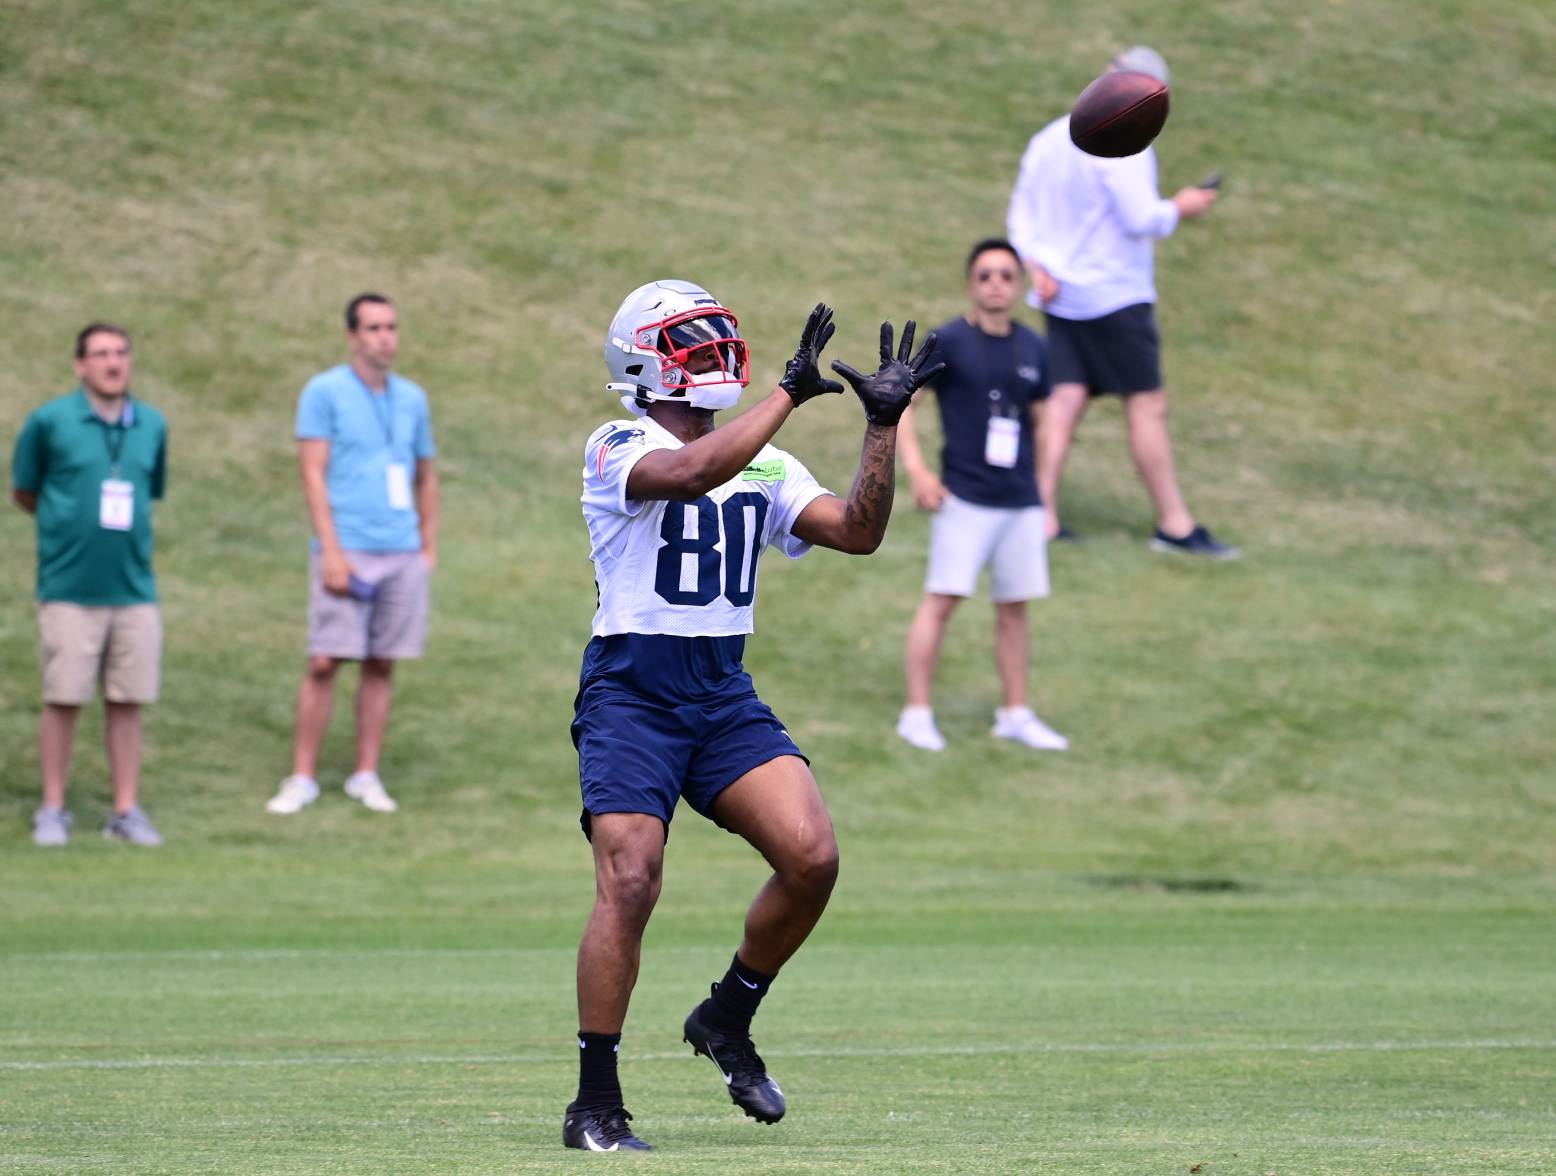 Jun 10, 2024; Foxborough, MA, USA; New England Patriots wide receiver Kayshon Boutte (80) makes a catch at minicamp at Gillette Stadium. Credit: Eric Canha-USA TODAY Sports